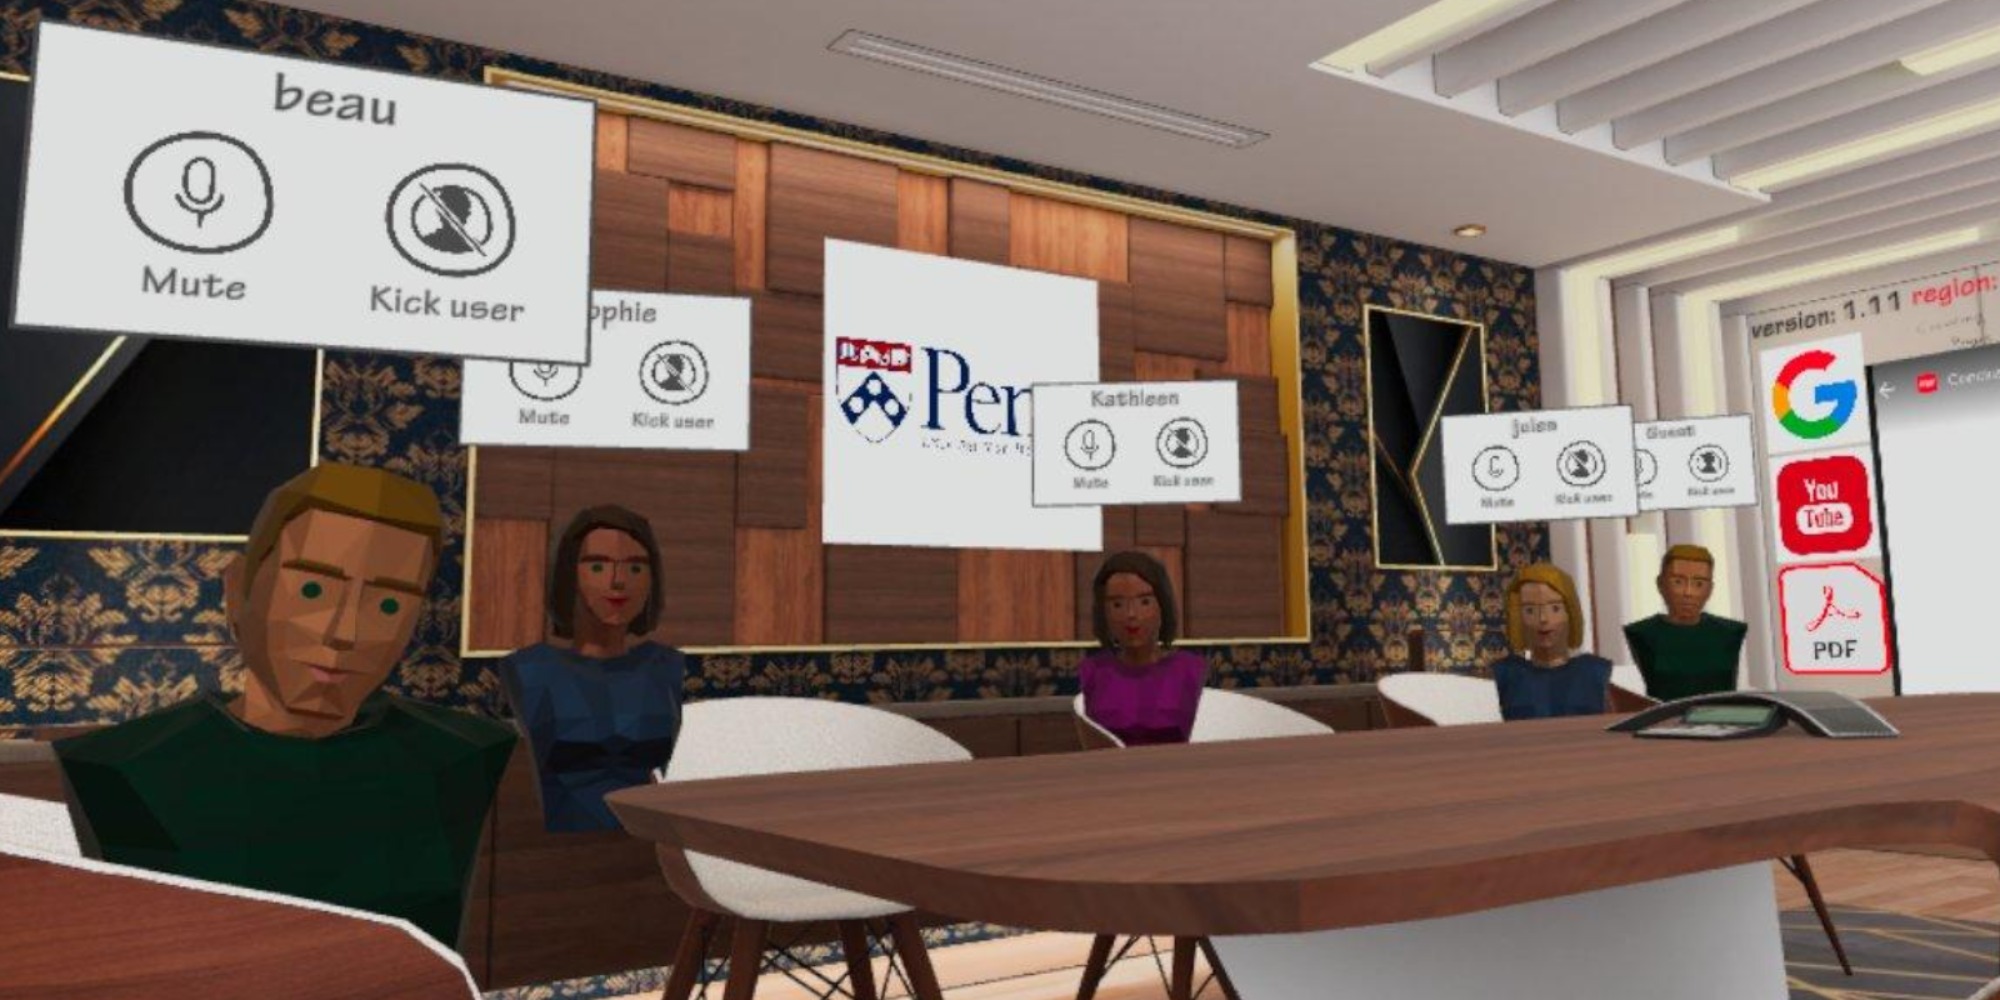 In virtual reality, students' avatars sit in chairs around a table, with their names above their heads.